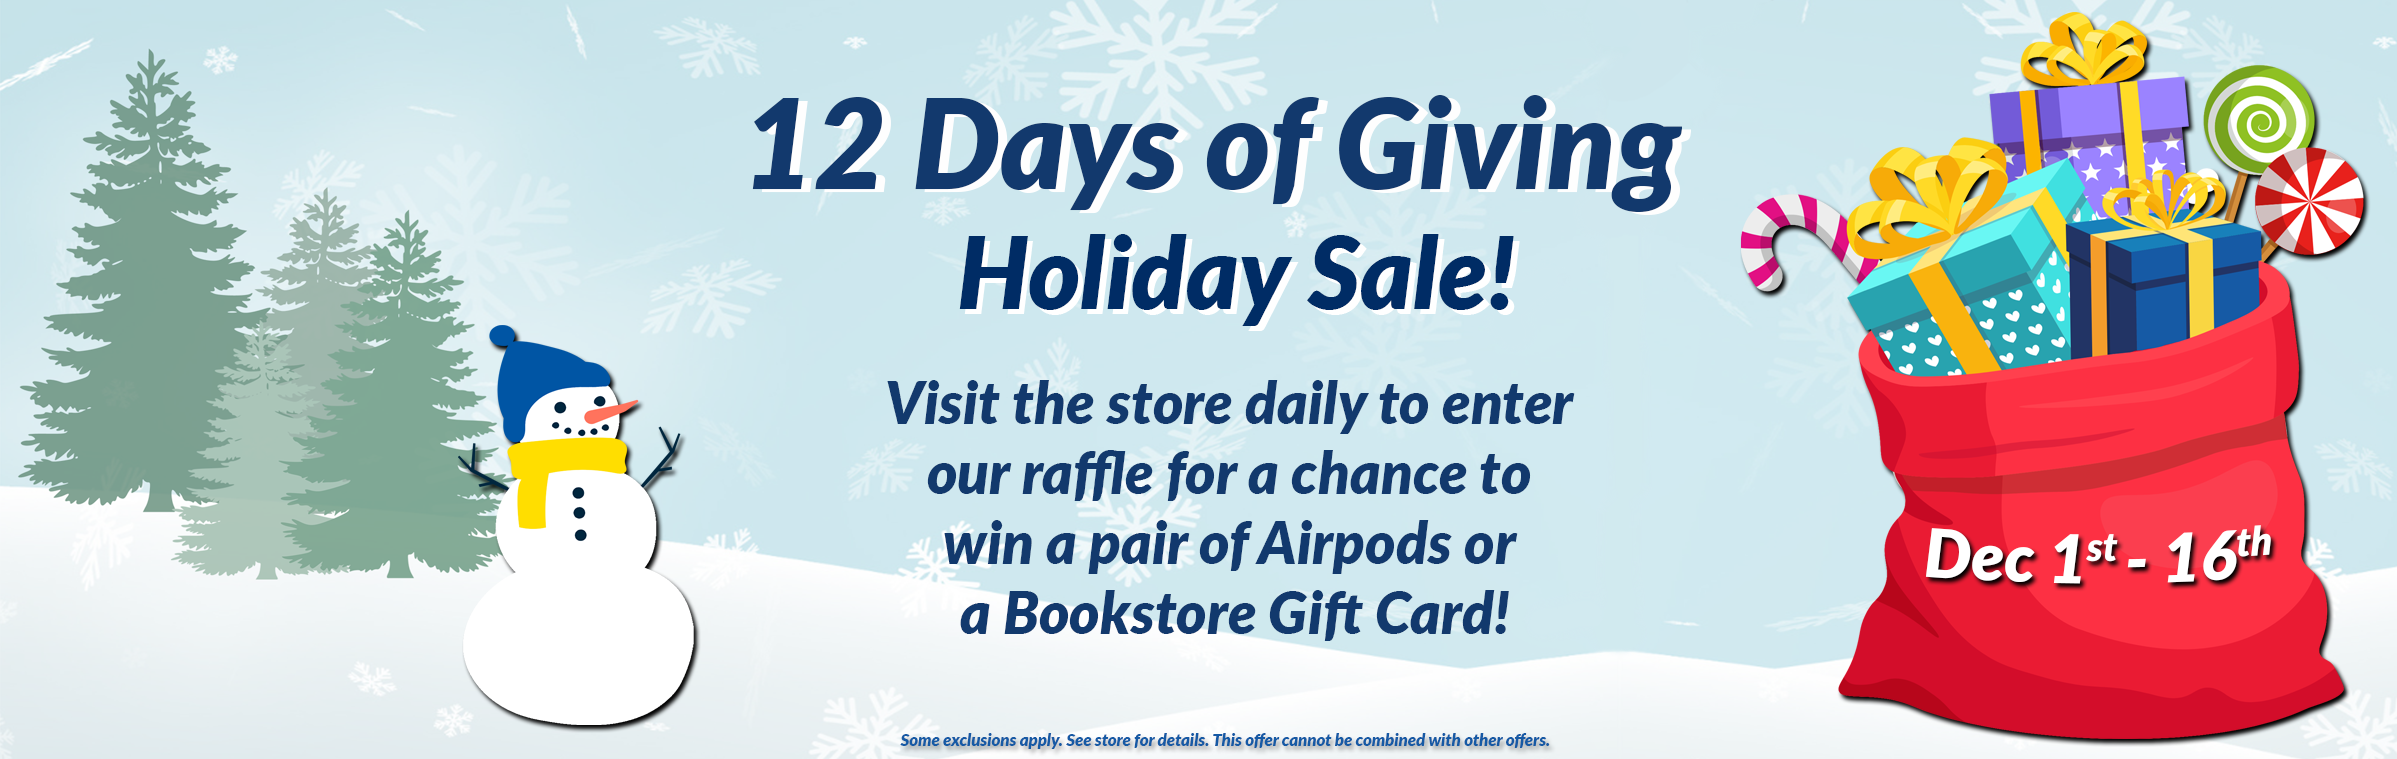 12 Days of Giving Holiday Sale